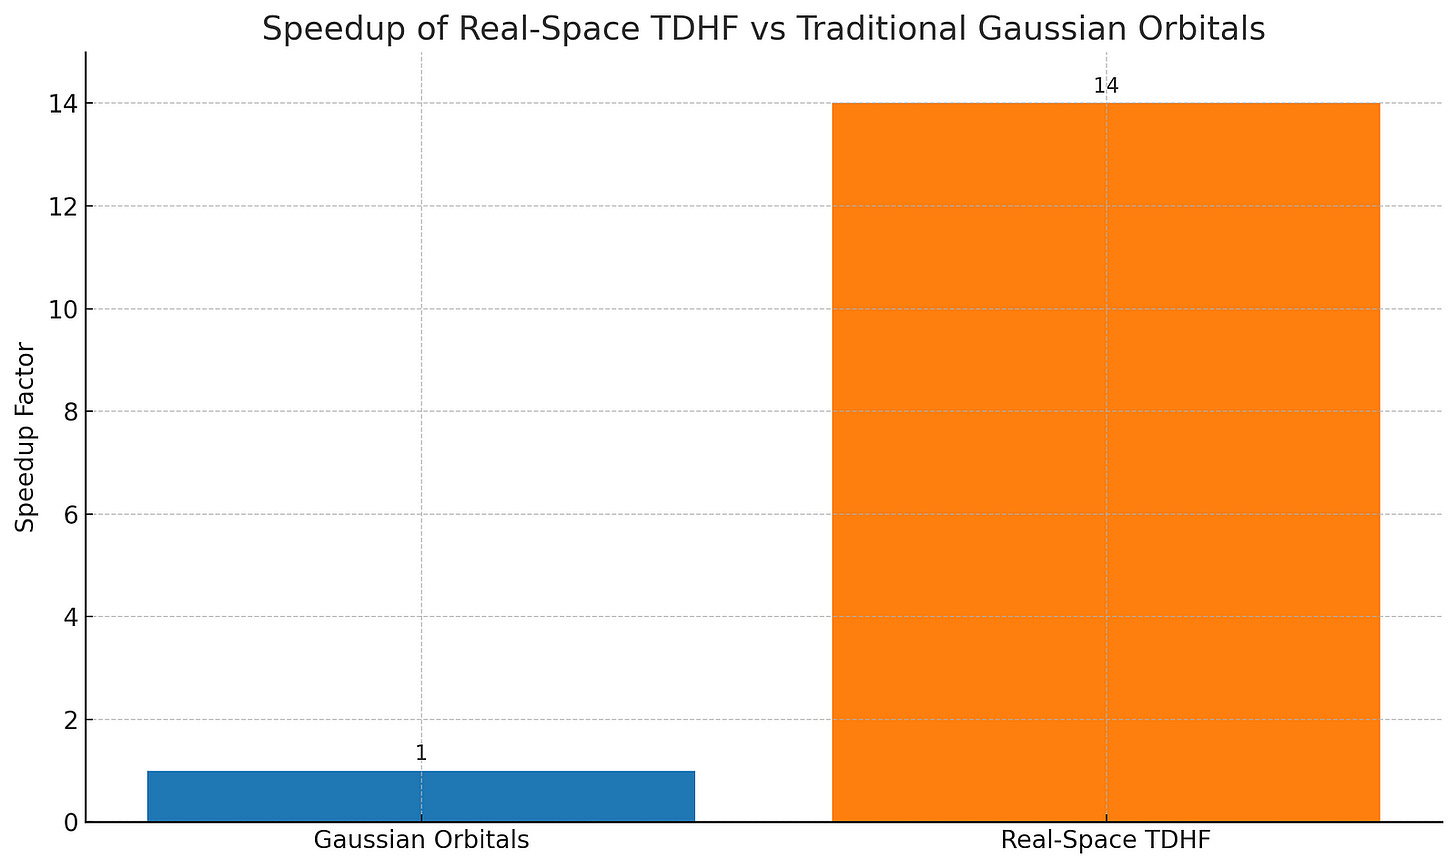 Bar graph displaying the speedup factor of computational methods, with Gaussian Orbitals at 1x speed and Real-Space TDHF at 14x speed, illustrated in blue and orange respectively.